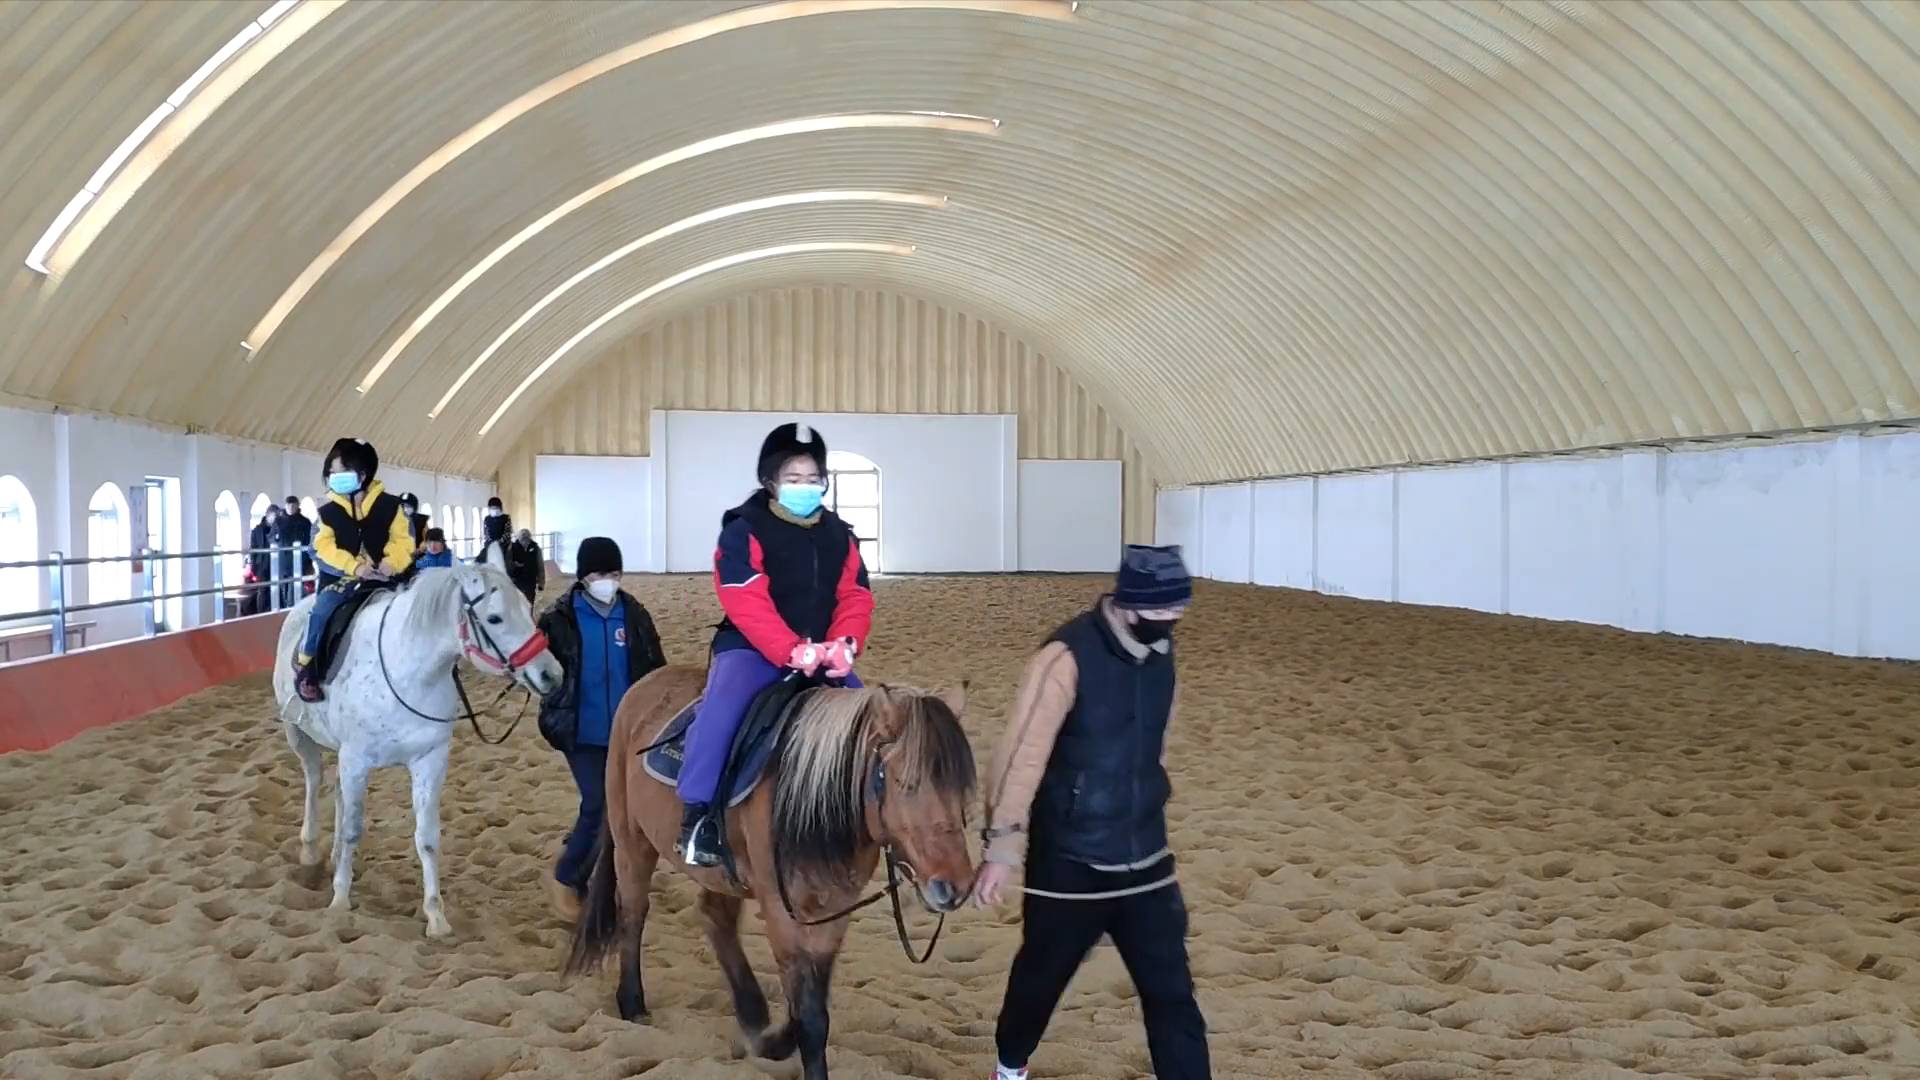 Indoor equestrian classes favored by students in Altay in Xinjiang, China